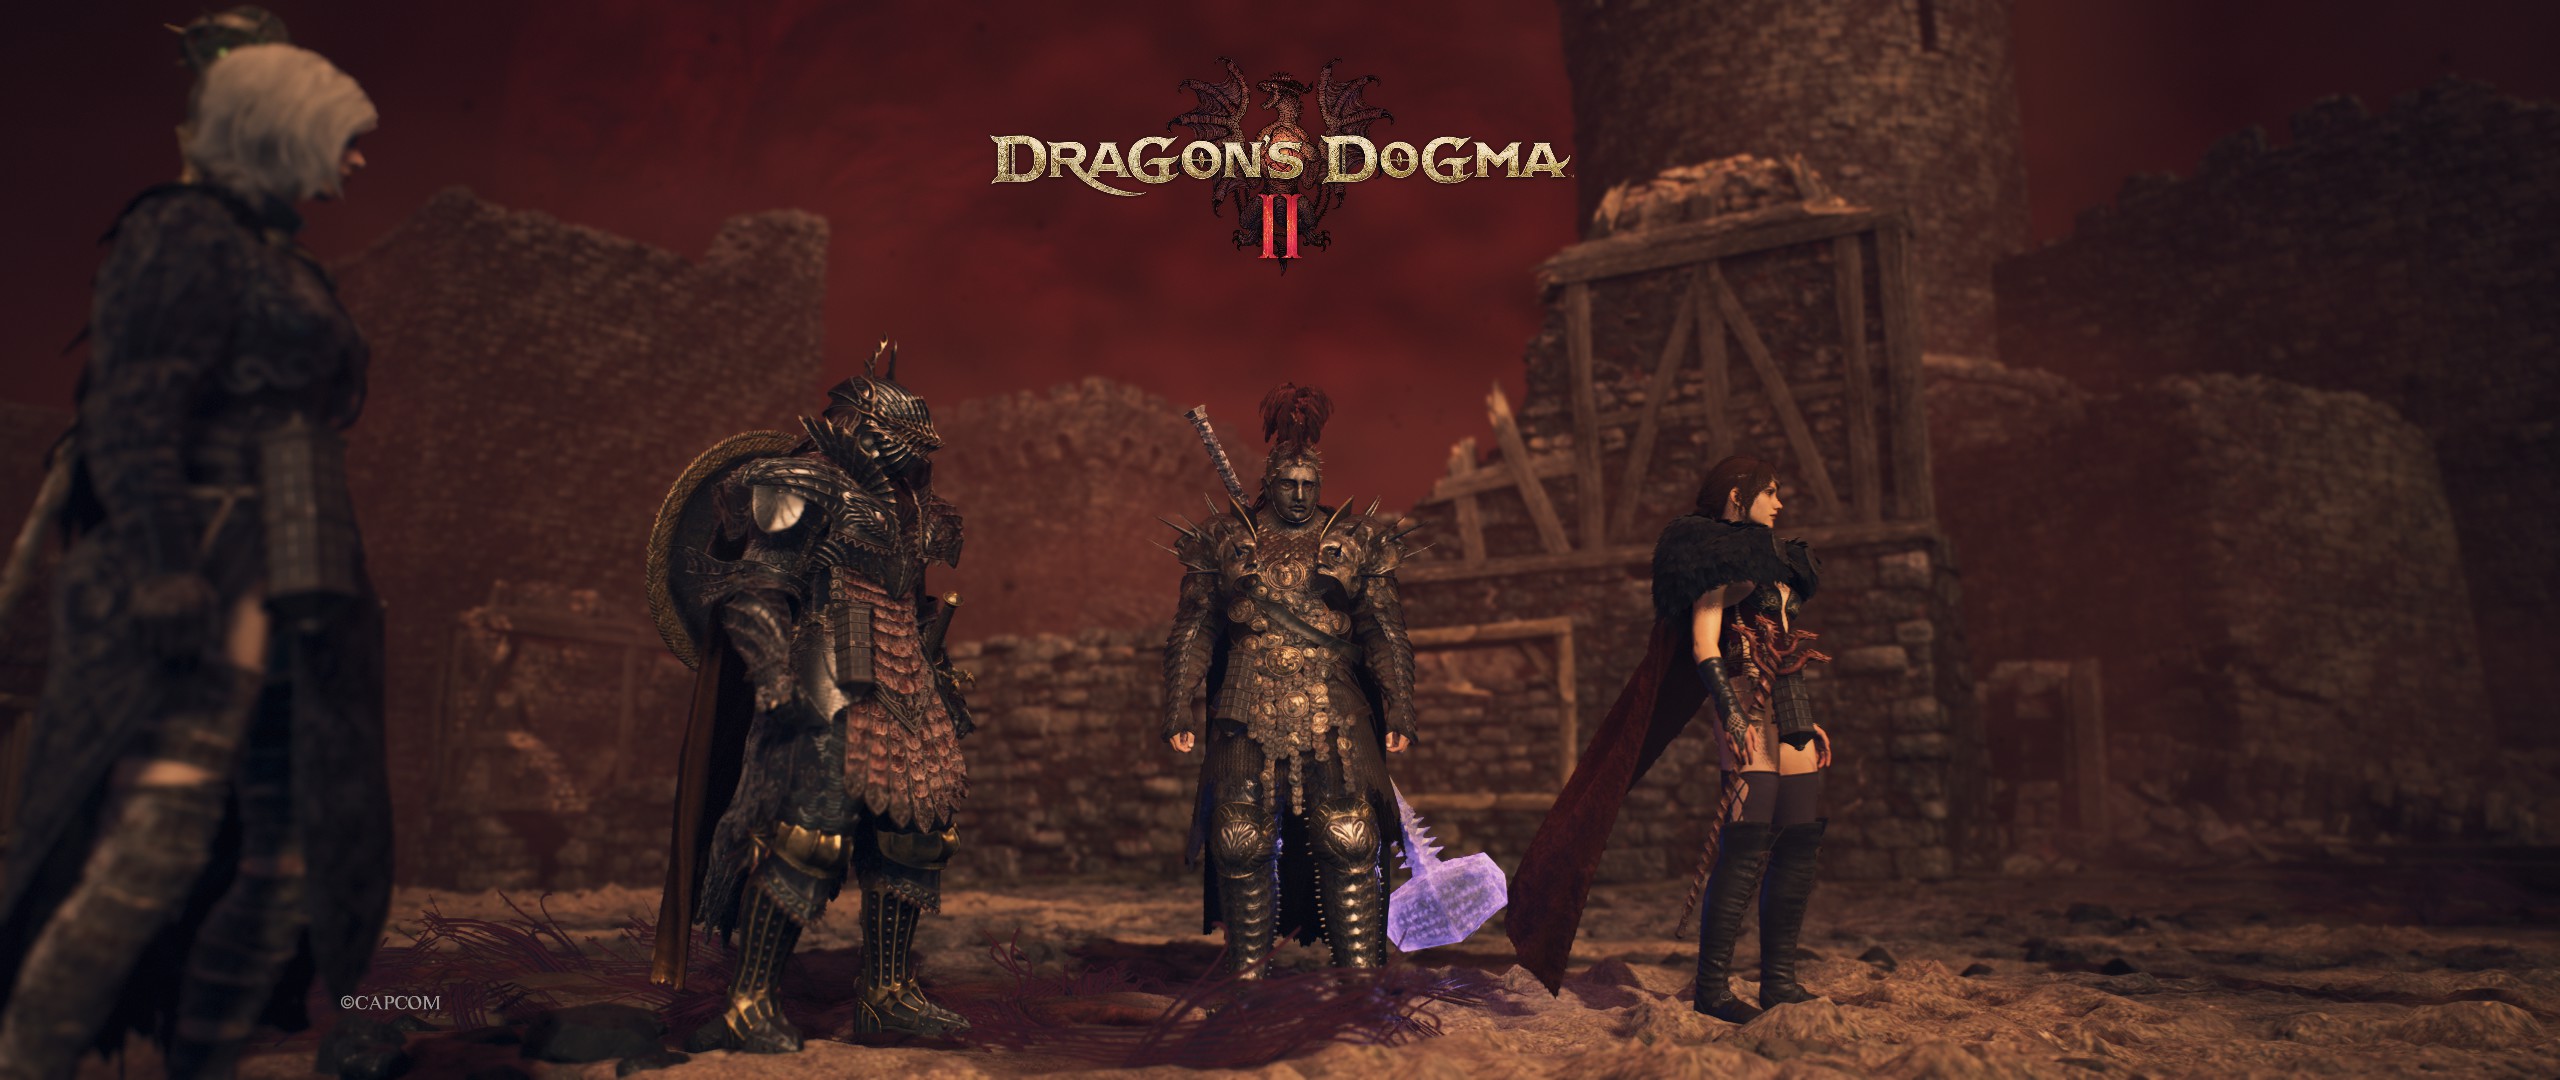 DD2 Game Games DD2 Dragons Dogma 2 Capcom Video Games Video Game Characters 2560x1080